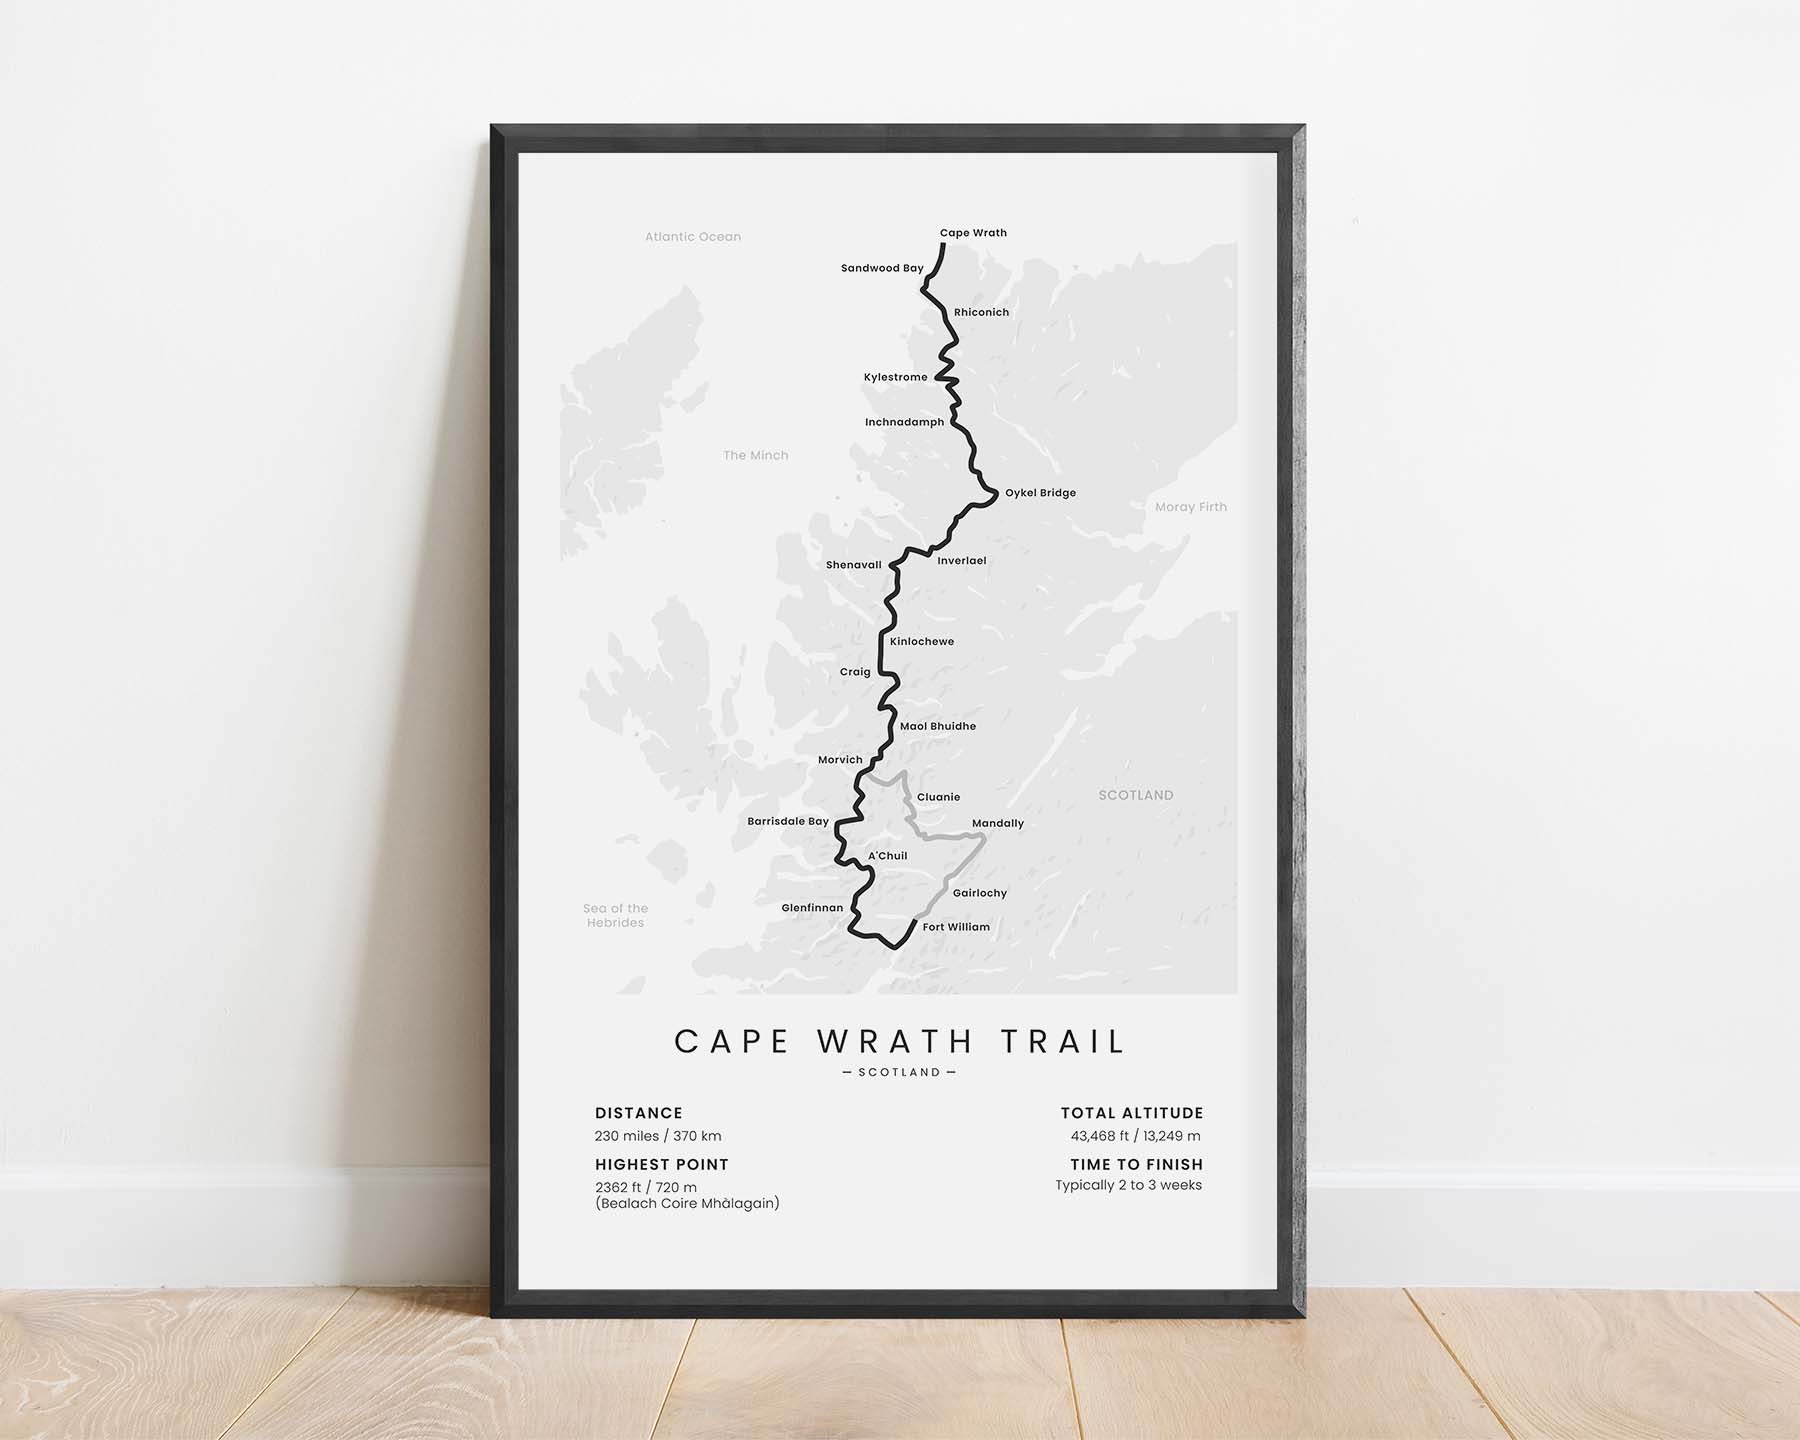 Cape Wrath Trail (Scottish Highlands) Path Poster with White Background in Minimal Room Decor